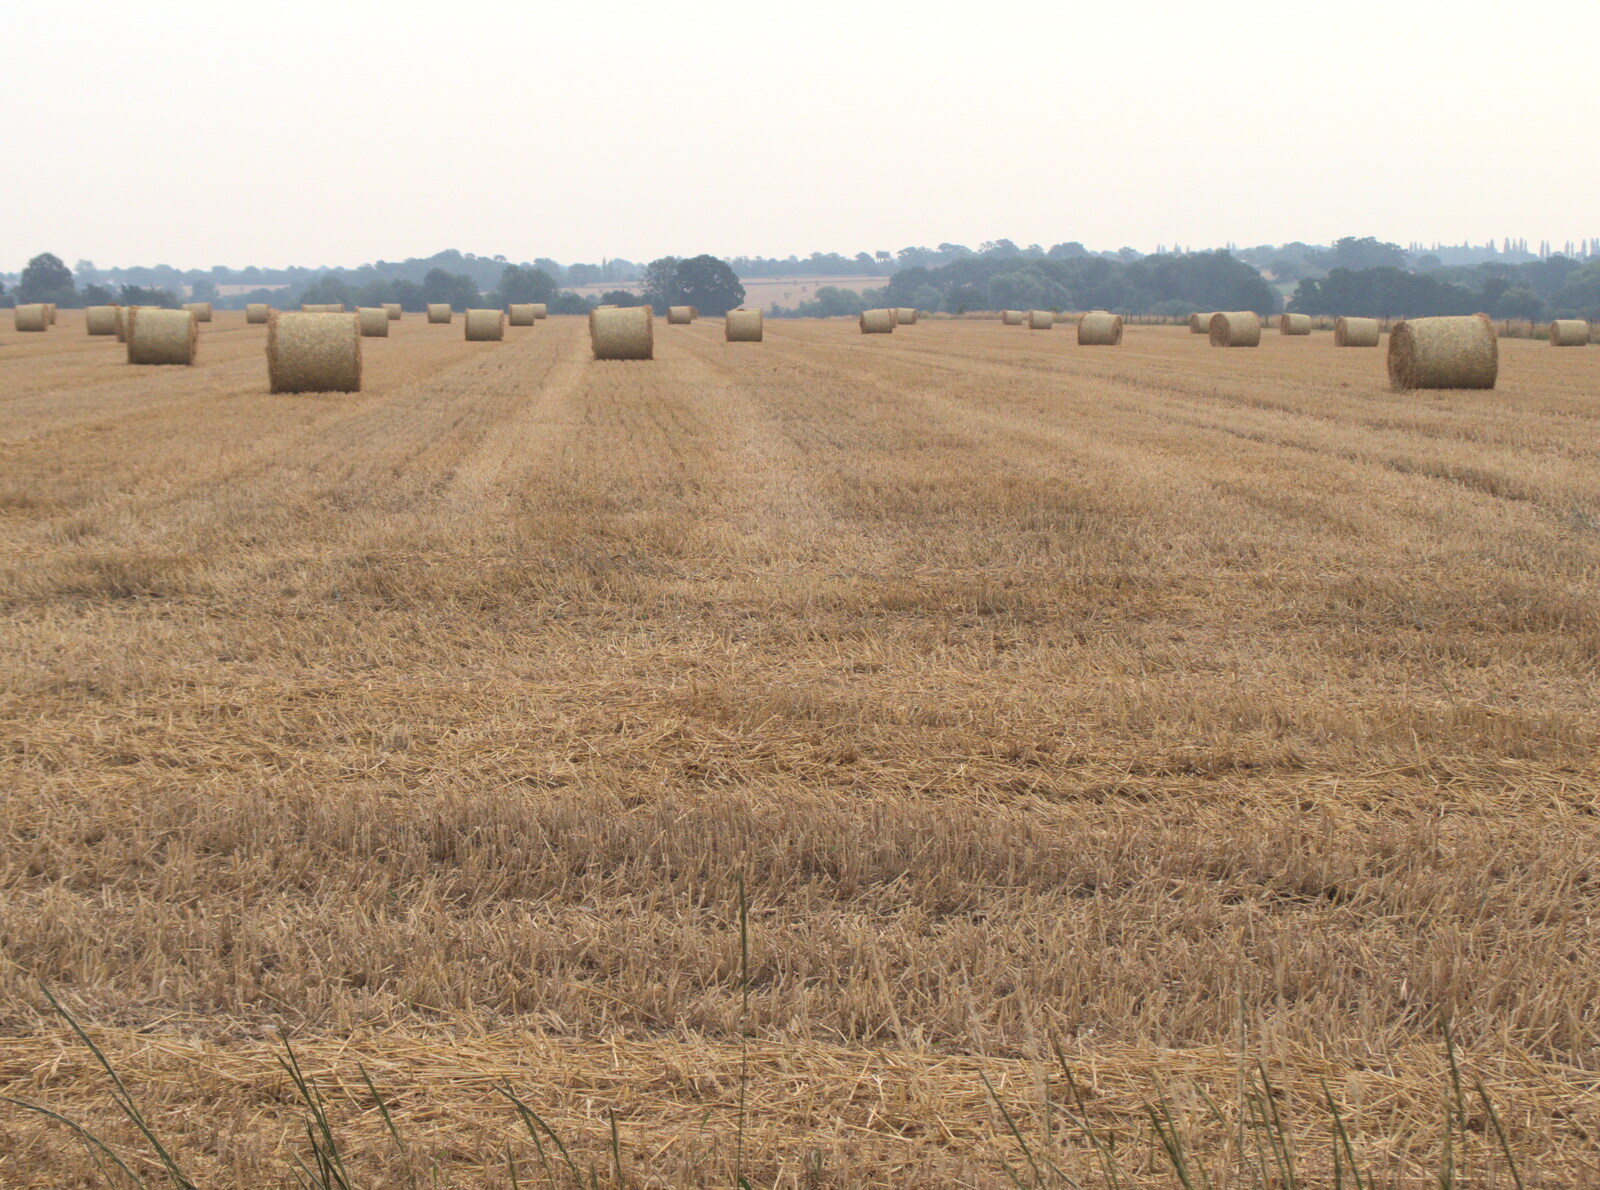 Round bales at Braisworth from More Bike Rides, and Marc's Birthday, Brome, Suffolk - 21st August 2020